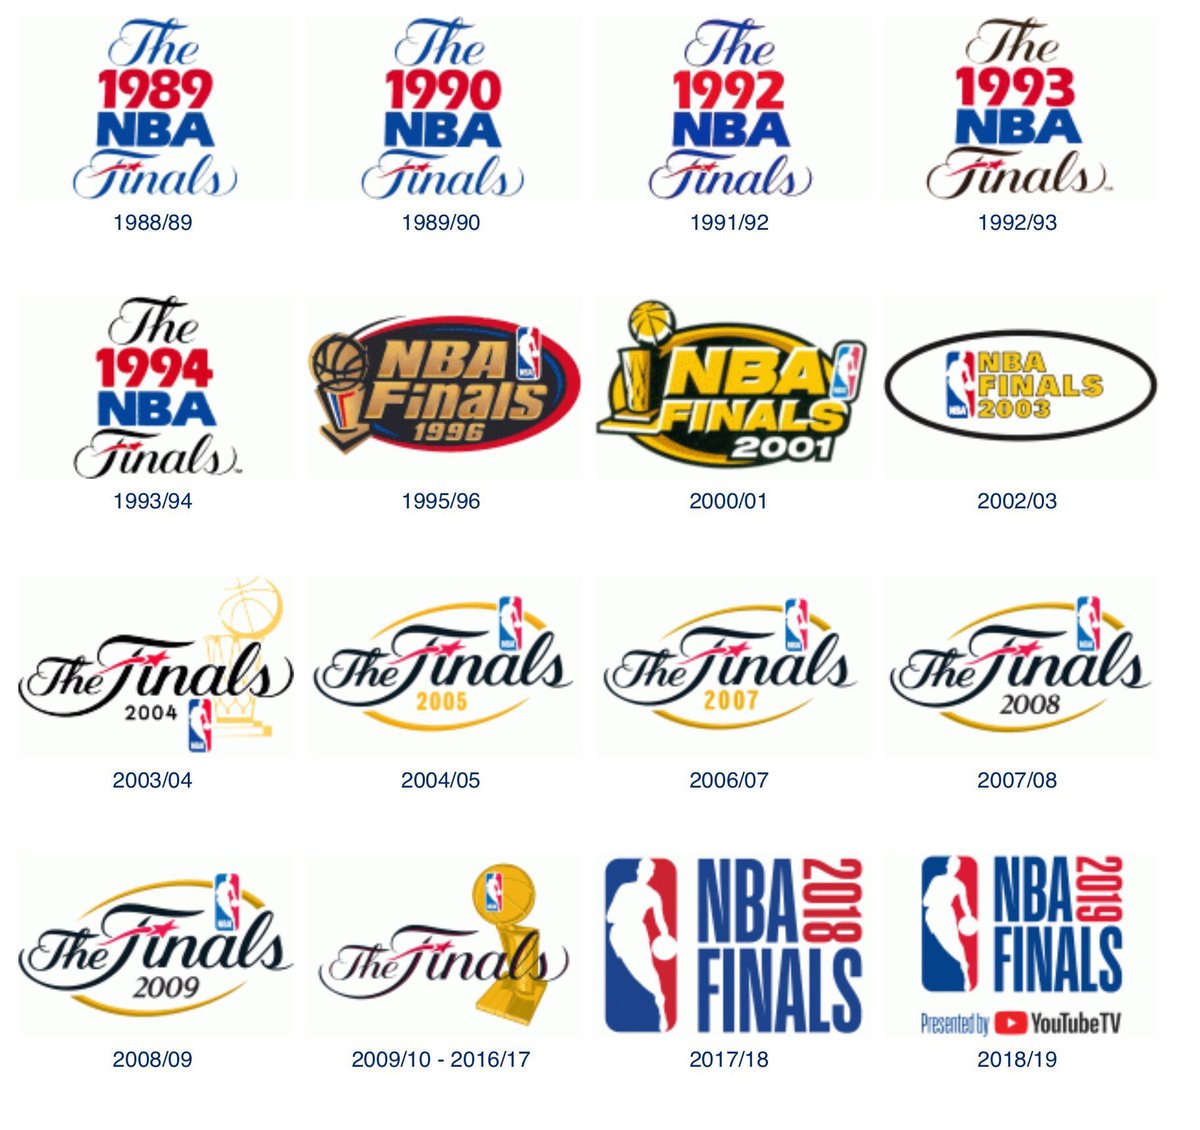 Vincent Goodwill On Twitter Only One Form Of Logo Has Worked Why The Nba Tries To Outsmart Itself I Ll Never Understand